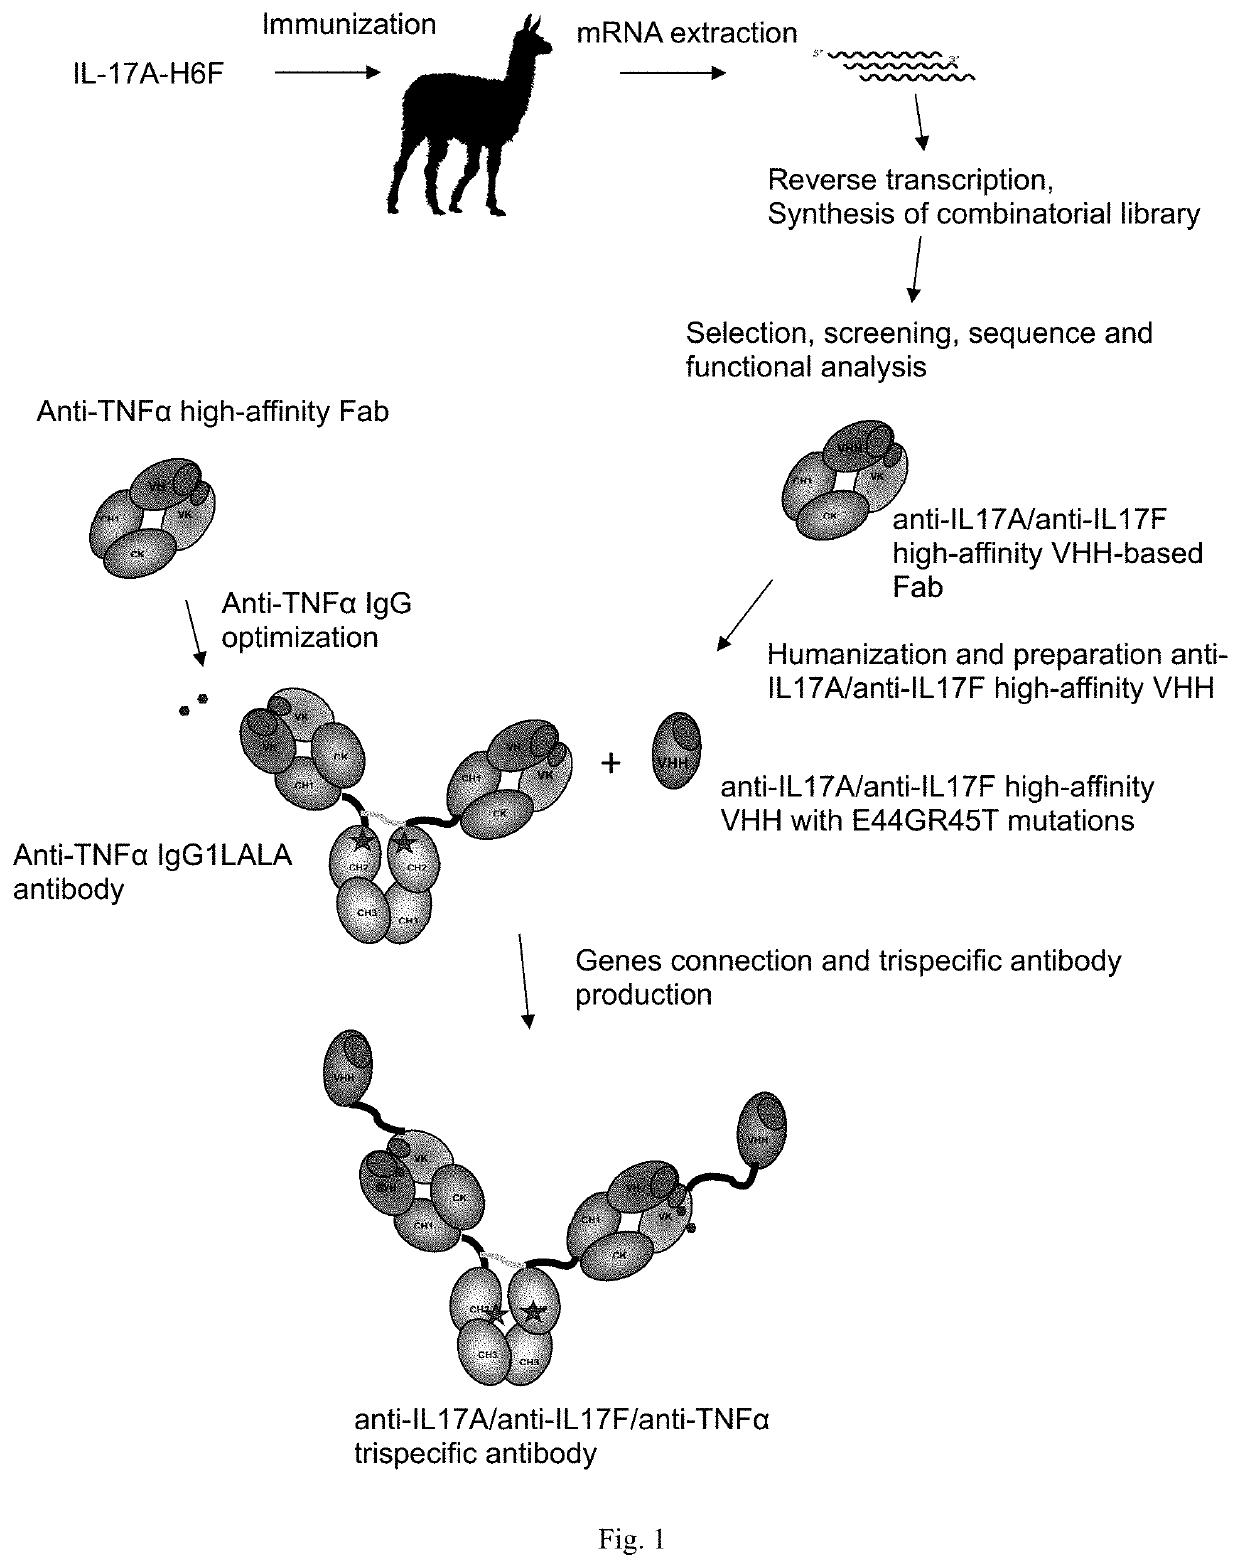 Trispecific antibodies against il-17a, il-17f and other pro-inflammatory molecule